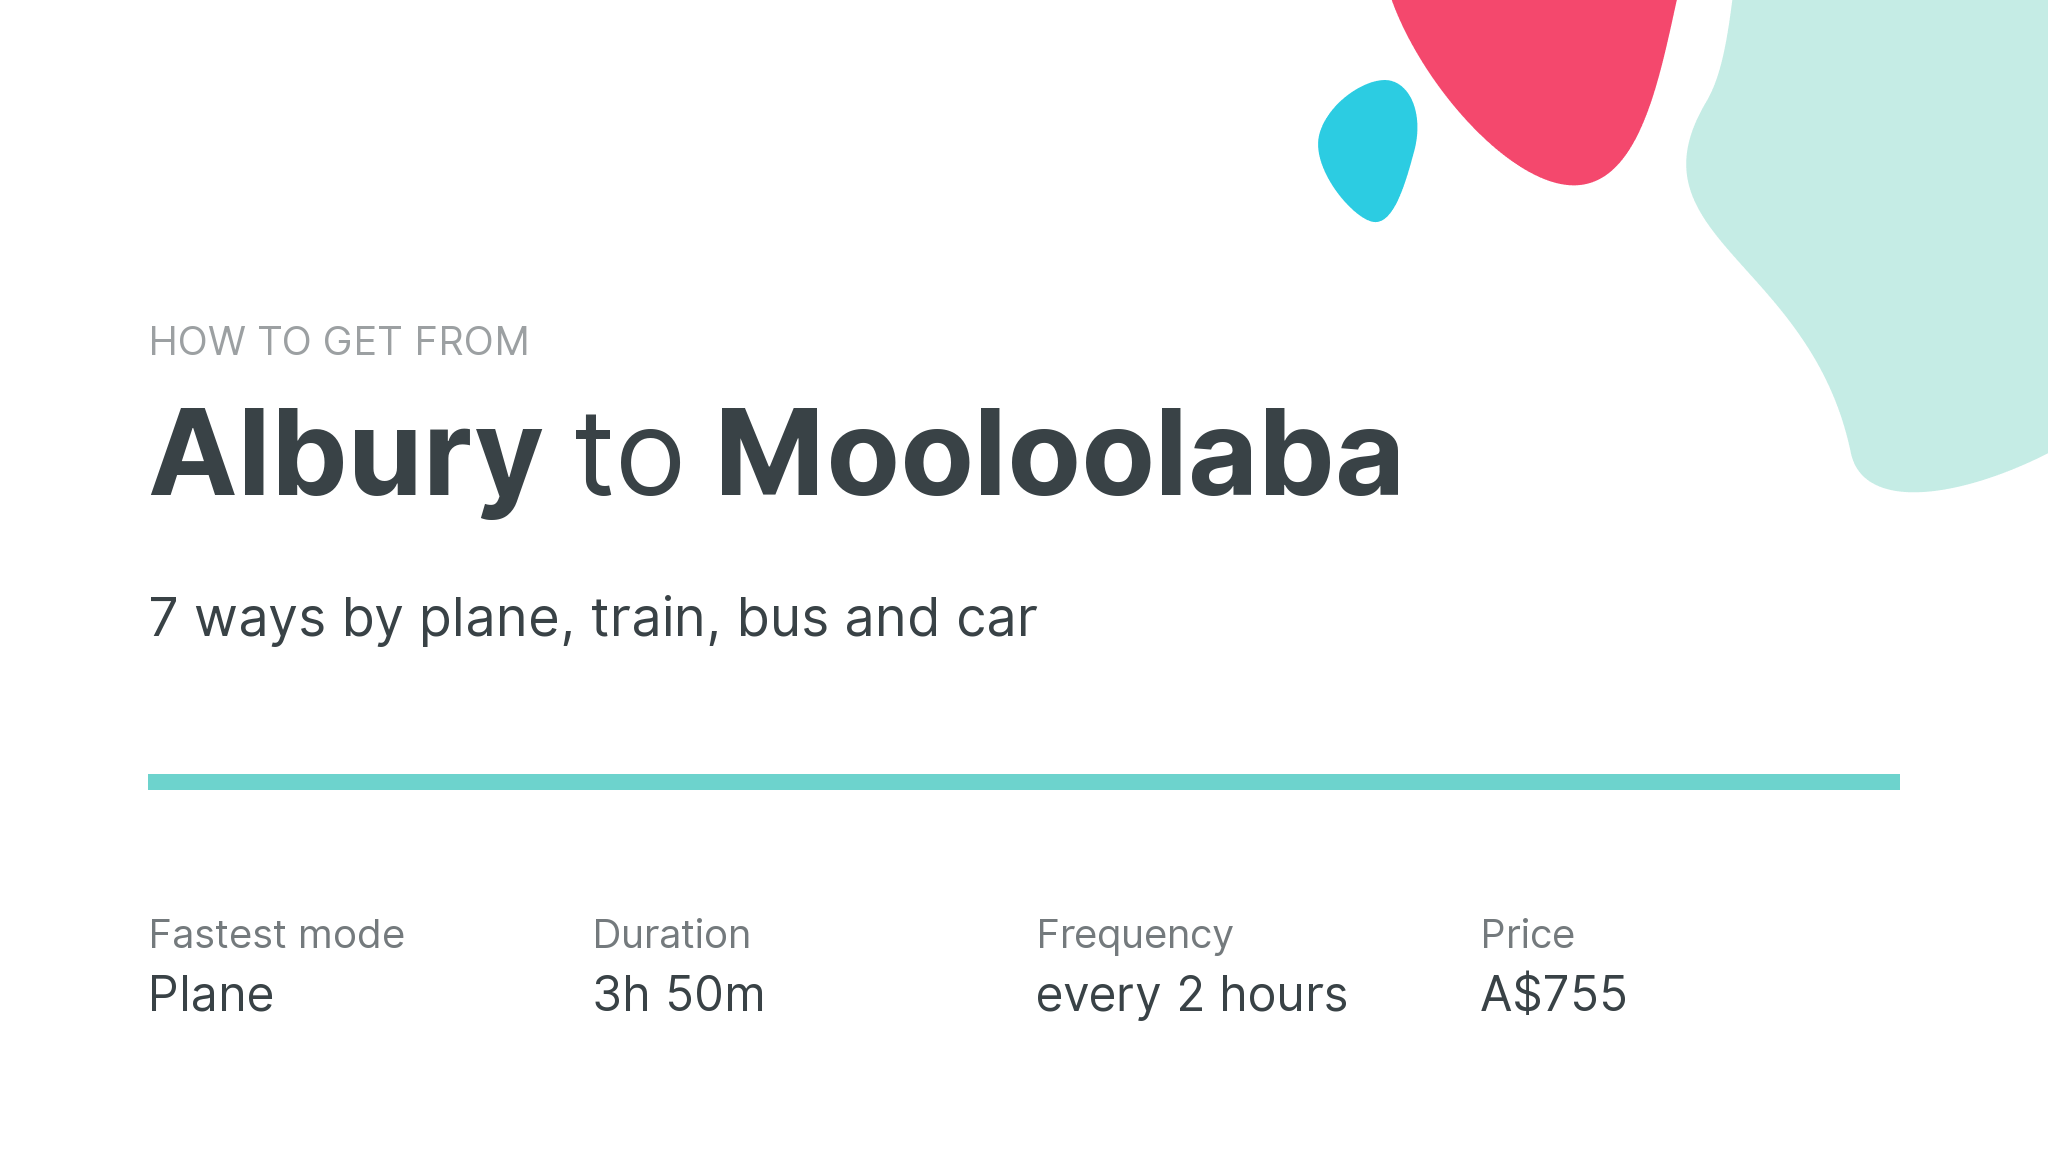 How do I get from Albury to Mooloolaba